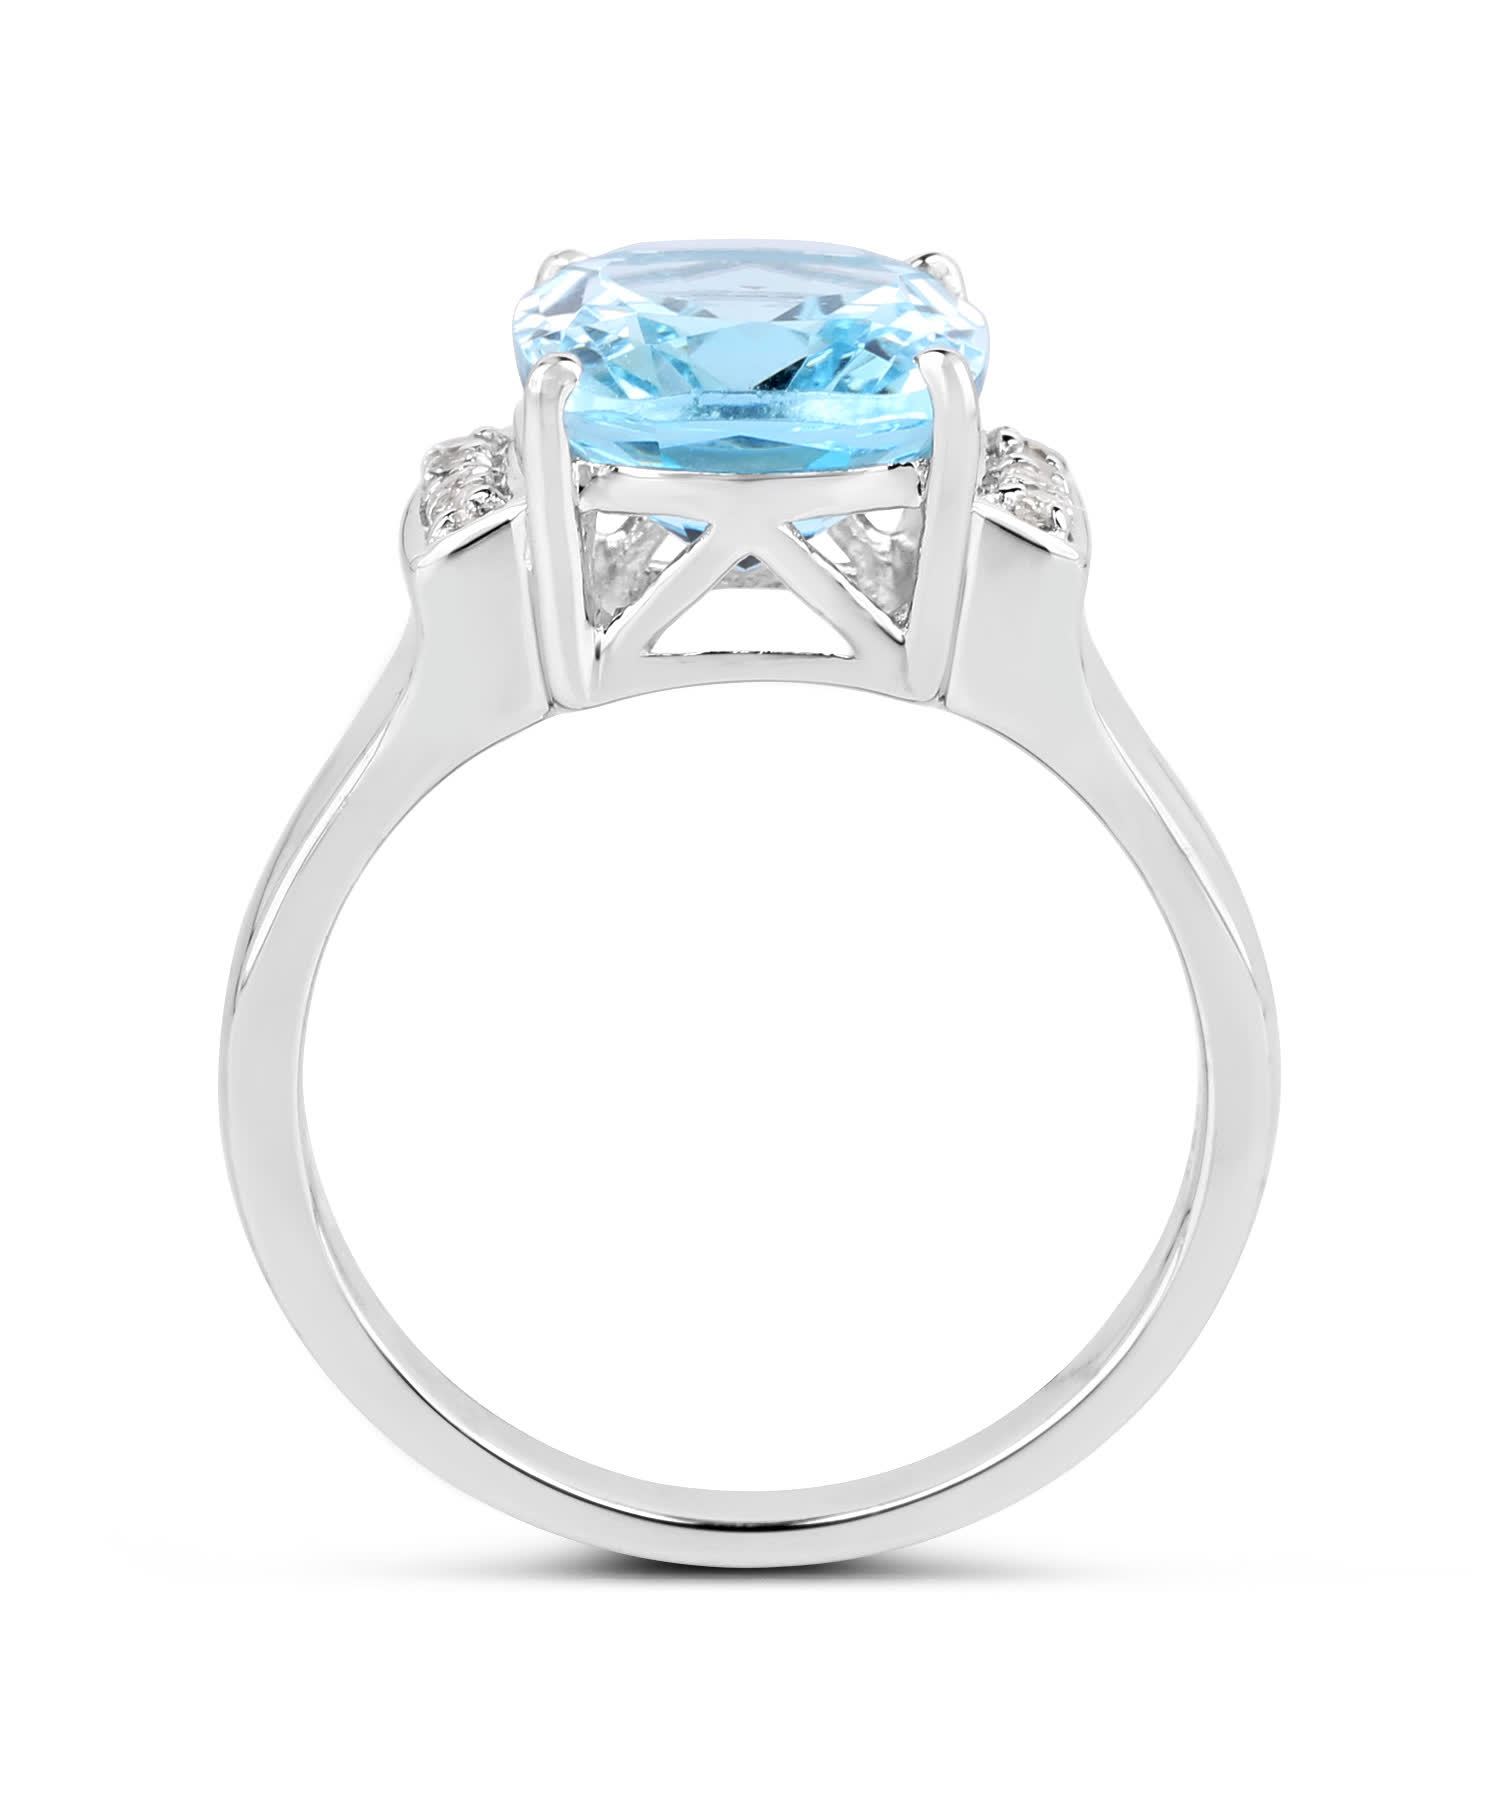 4.28ctw Natural Swiss Blue Topaz Rhodium Plated 925 Sterling Silver Ring View 2